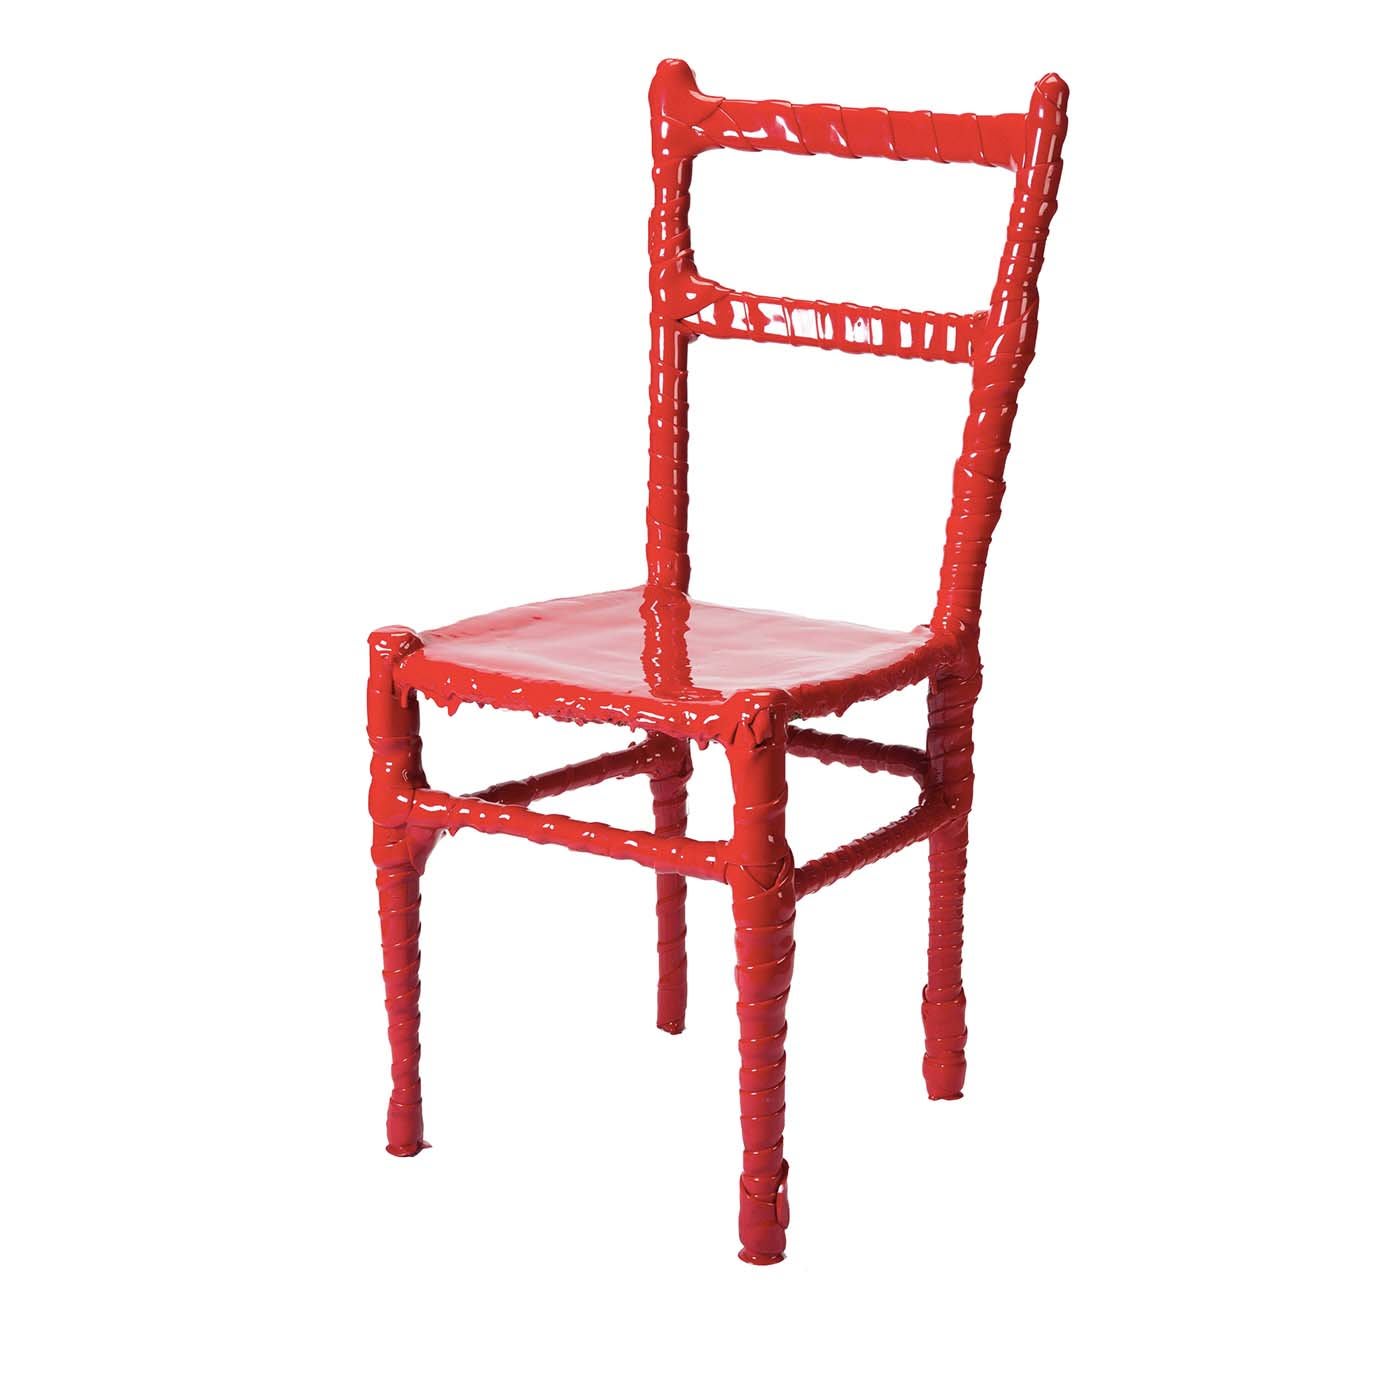 N. 03/20 One-Off chair by Paola Navone - Corsi Design Factory